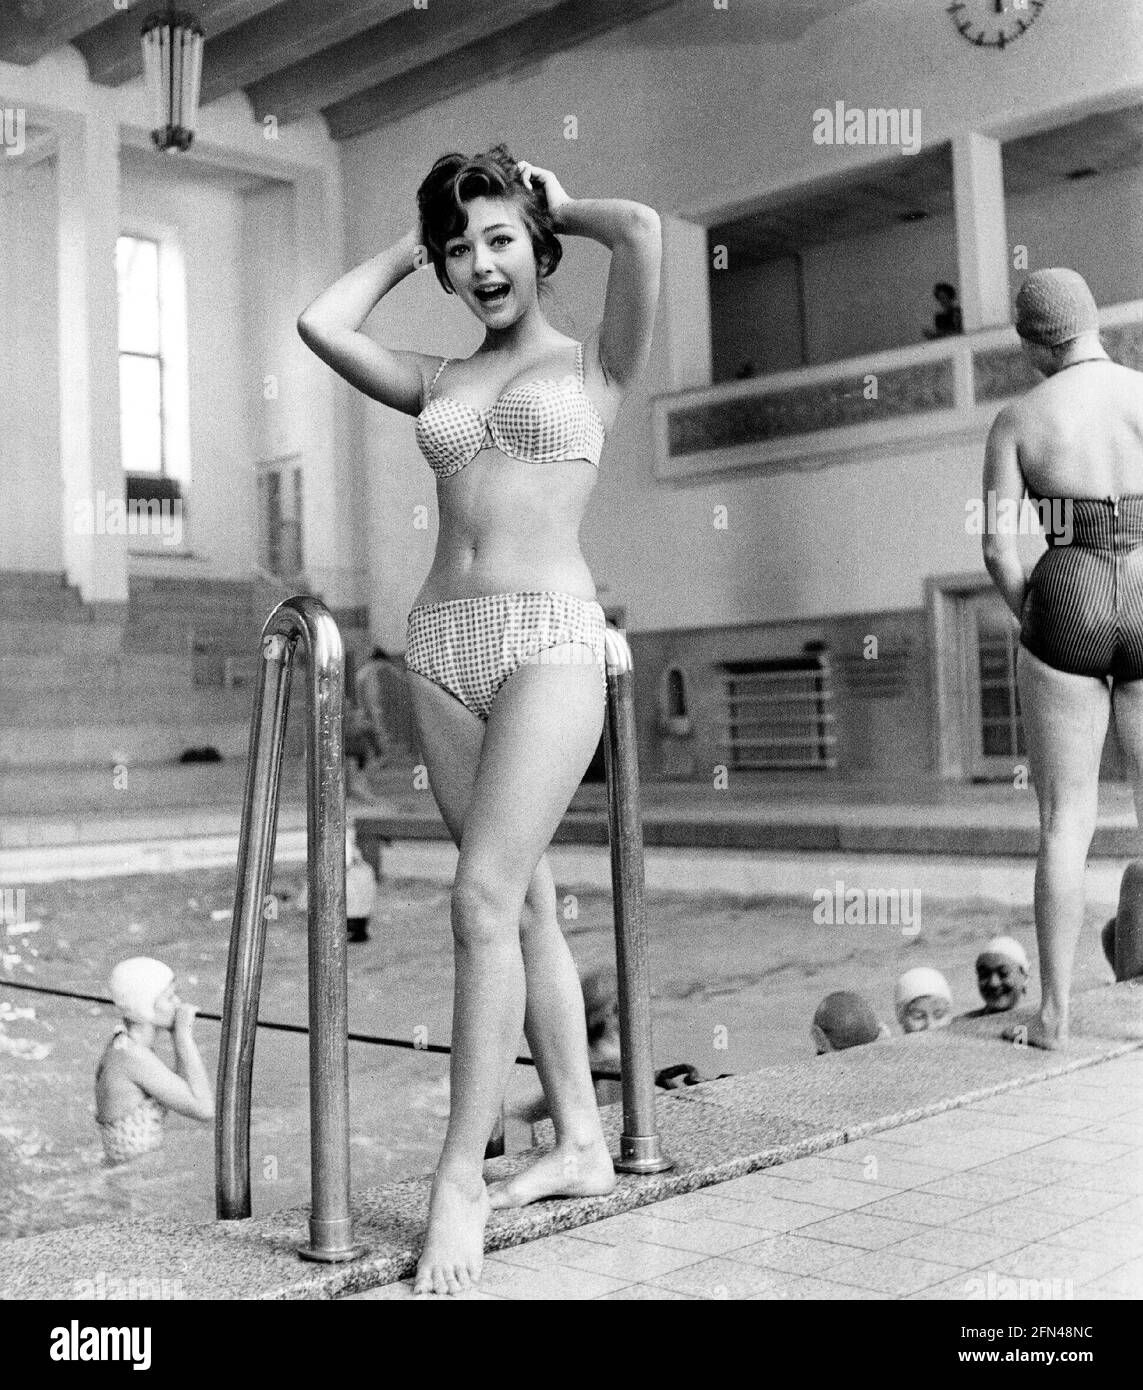 Kaufmann, Christine, 11.1.1945 - 28.3.2017, German actress, wearing bikini, swimming bath, late 1950s, ADDITIONAL-RIGHTS-CLEARANCE-INFO-NOT-AVAILABLE Stock Photo